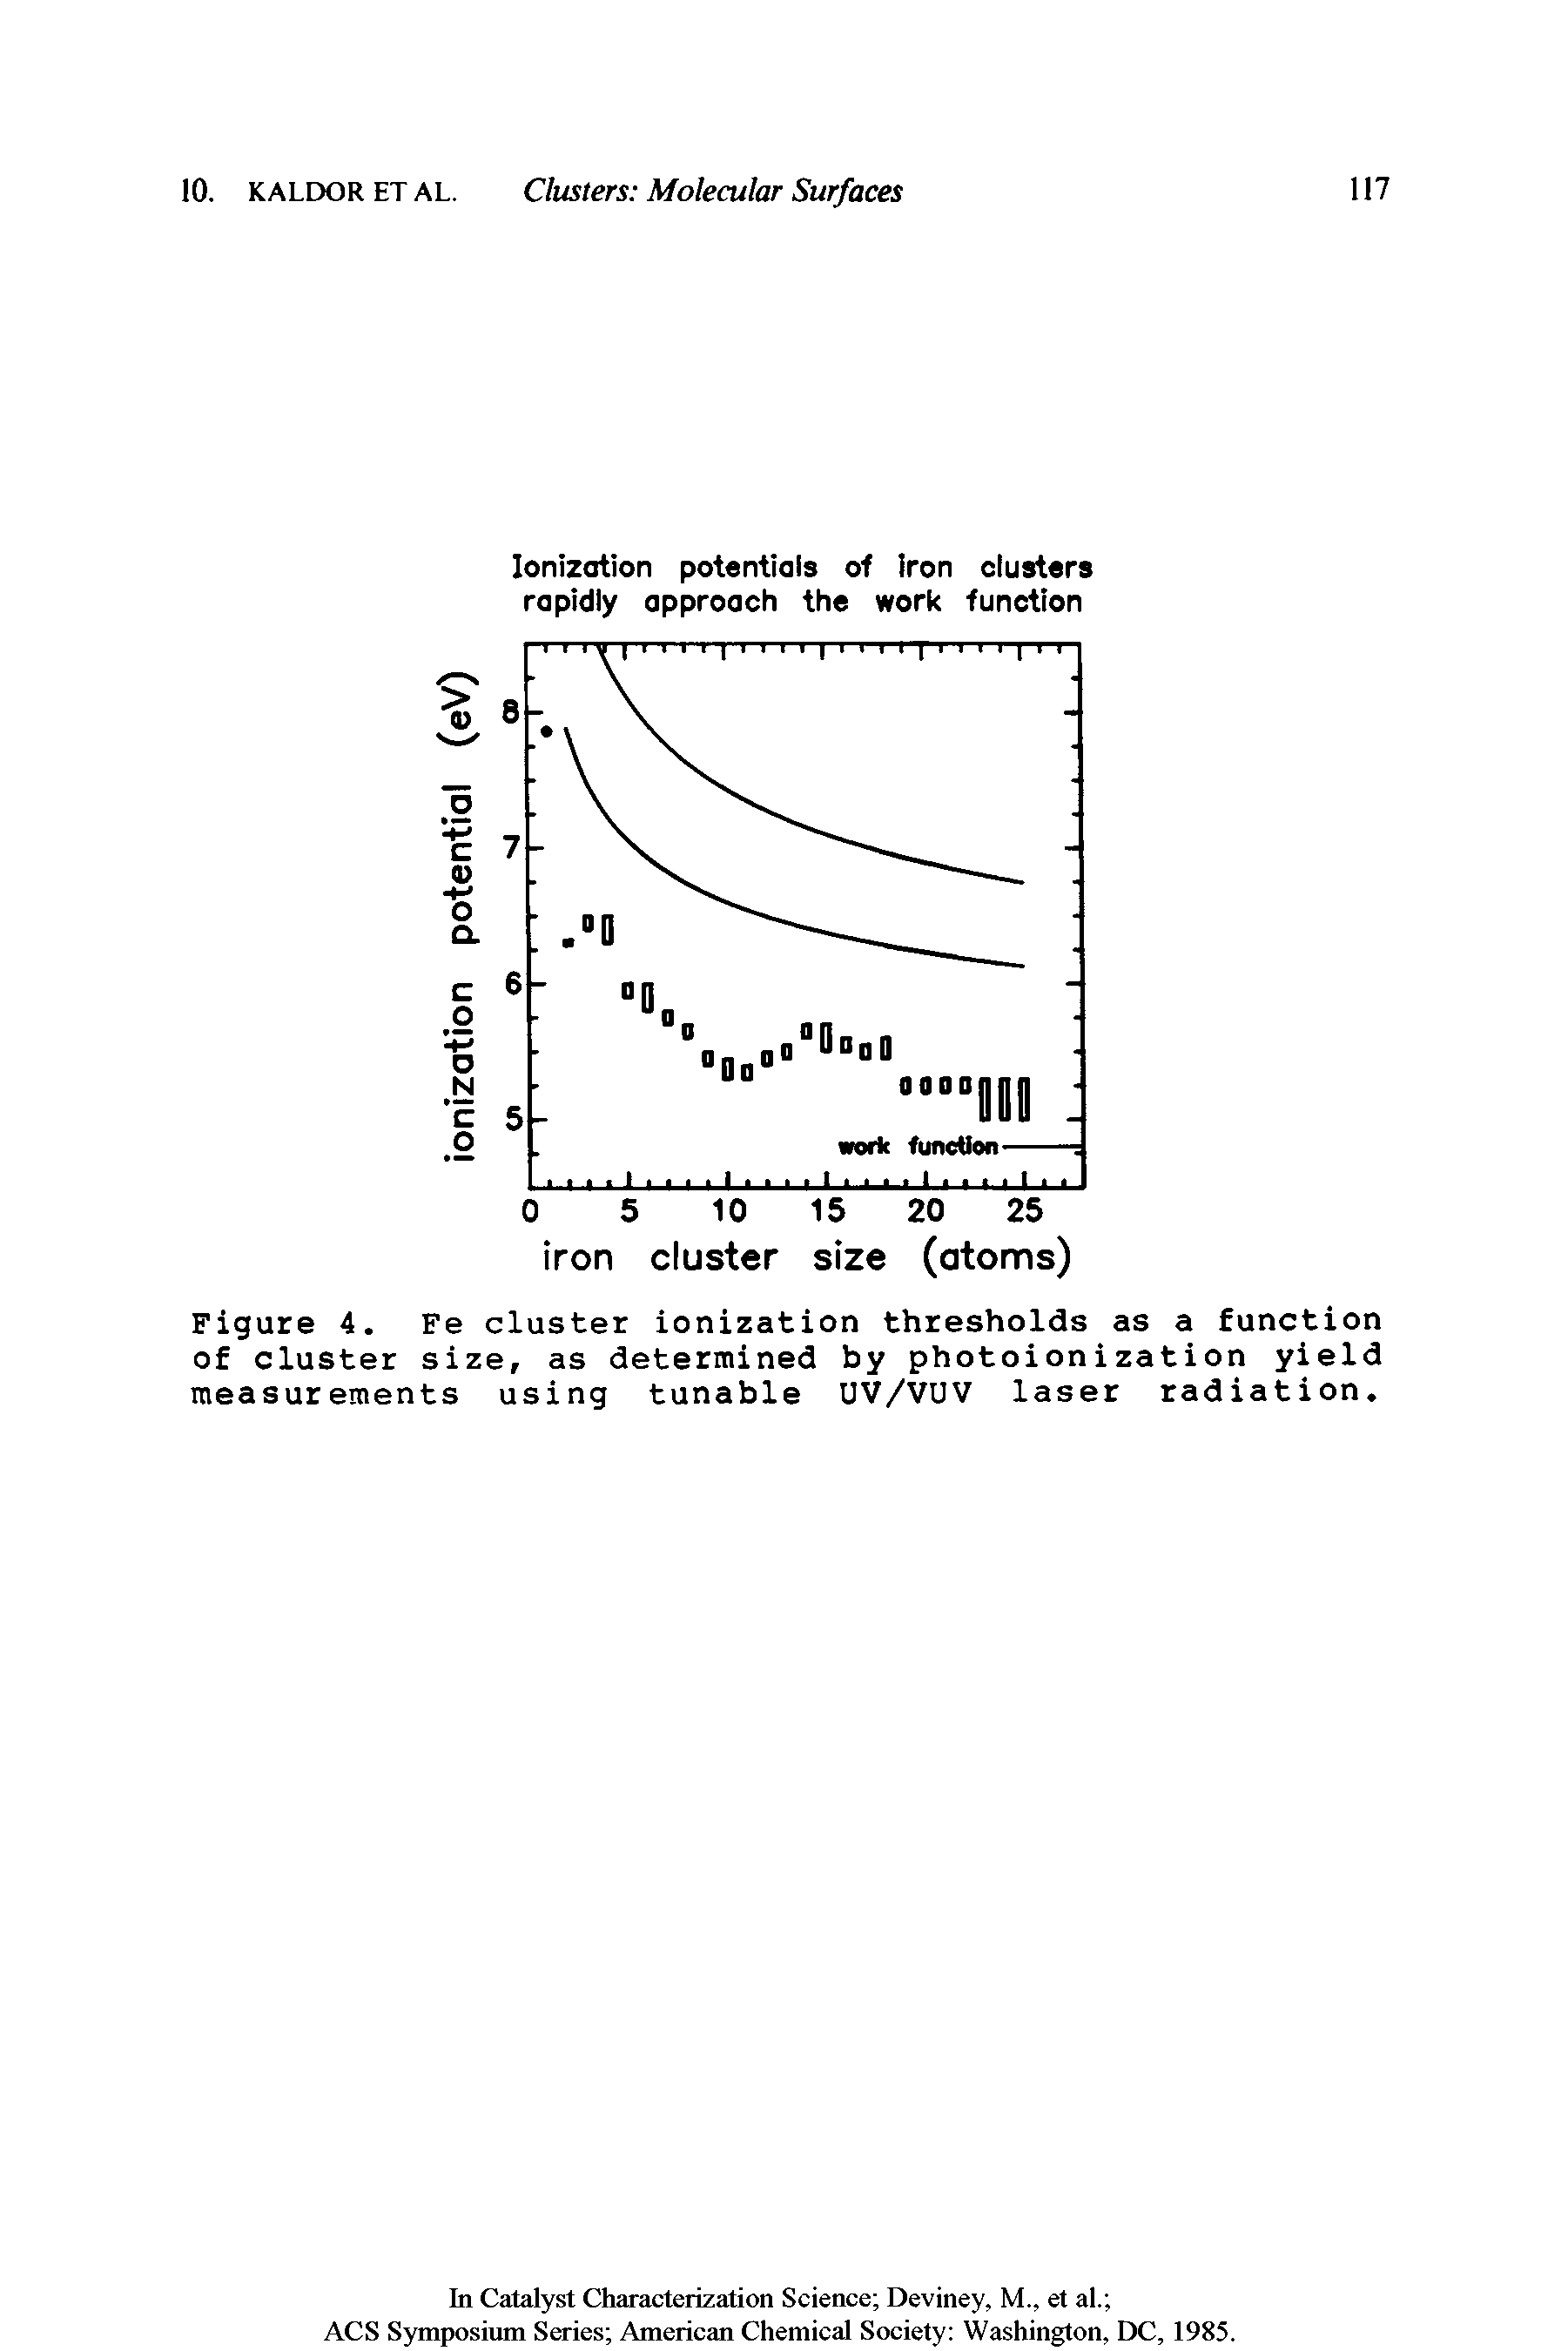 Figure 4. Fe cluster ionization thresholds as a function of cluster size, as determined by photoionization yield measurements using tunable UV/VUV laser radiation.